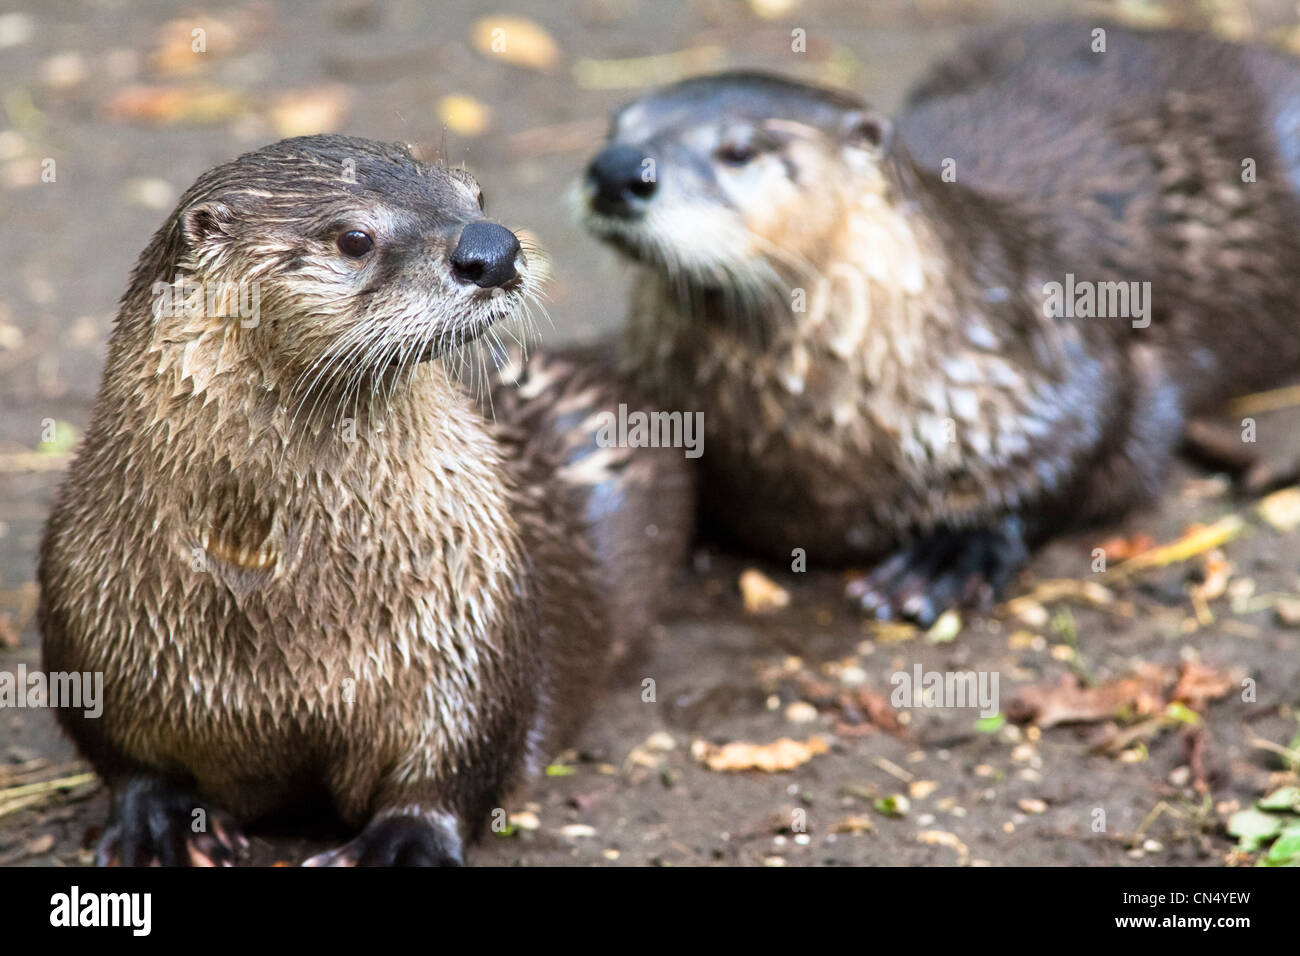 North American River Otter portrait - Lontra canadensis Stock Photo